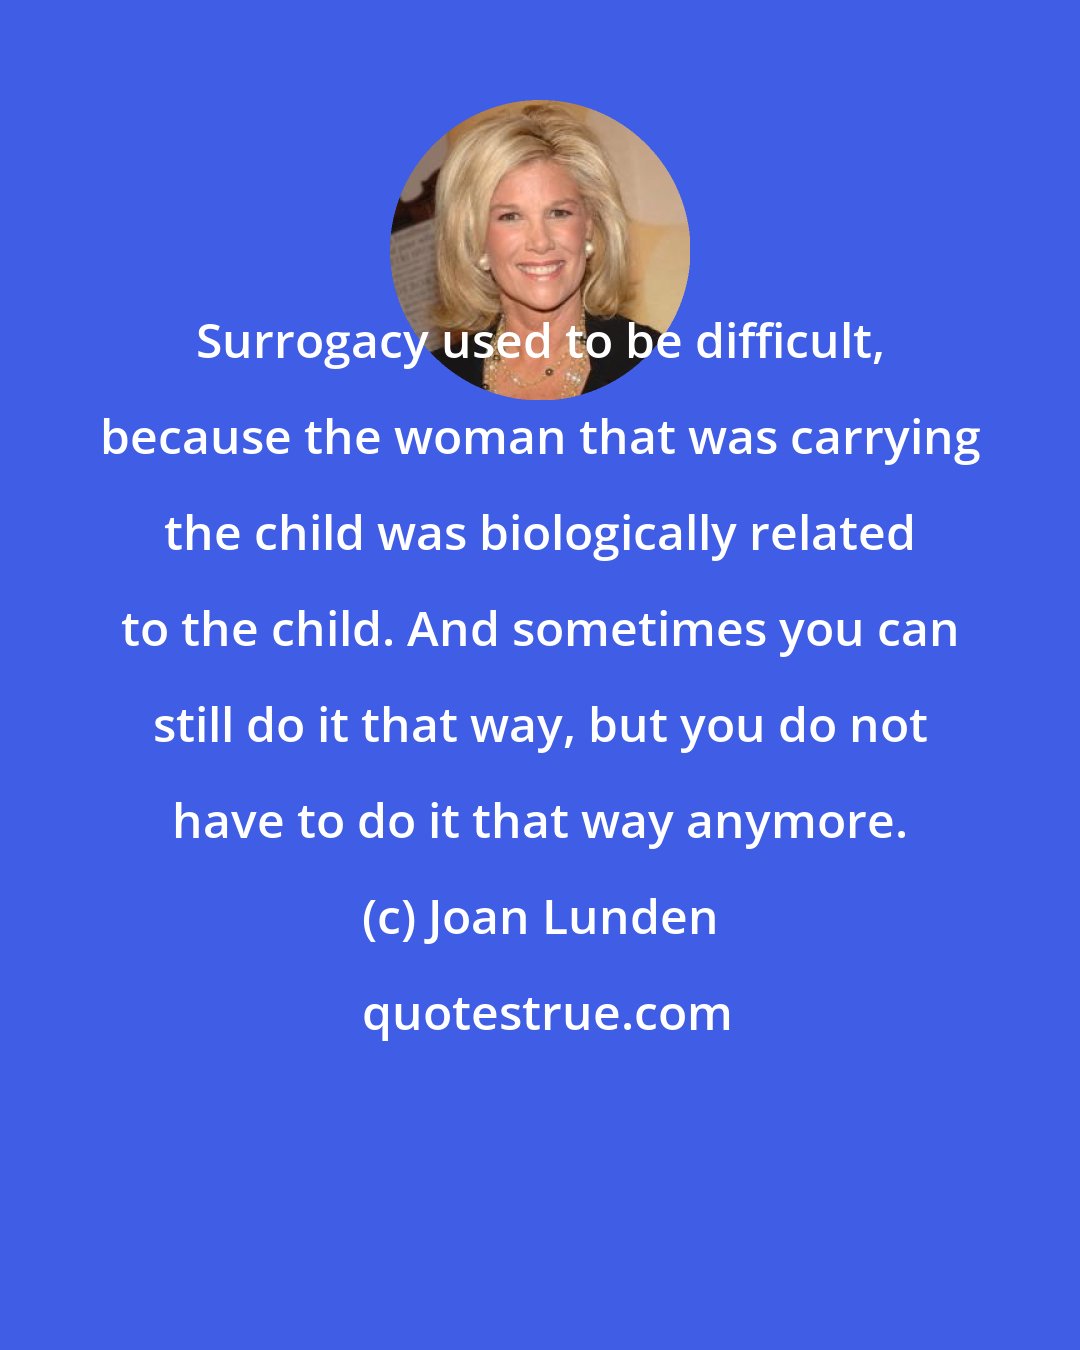 Joan Lunden: Surrogacy used to be difficult, because the woman that was carrying the child was biologically related to the child. And sometimes you can still do it that way, but you do not have to do it that way anymore.